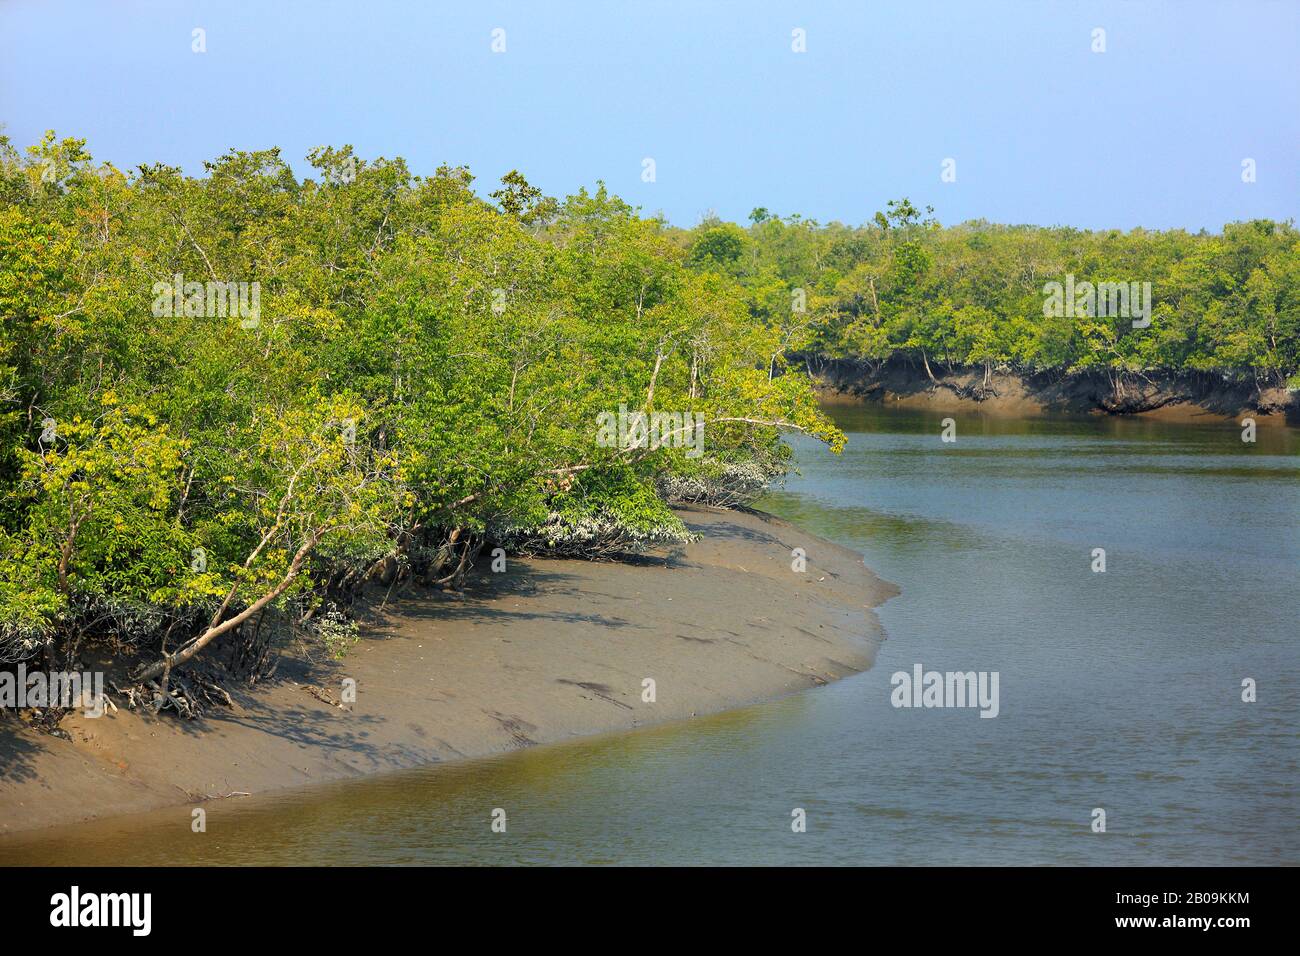 Sundarban, the largest littoral mangrove forest in the world.  Bangladesh. December 2010. Stock Photo